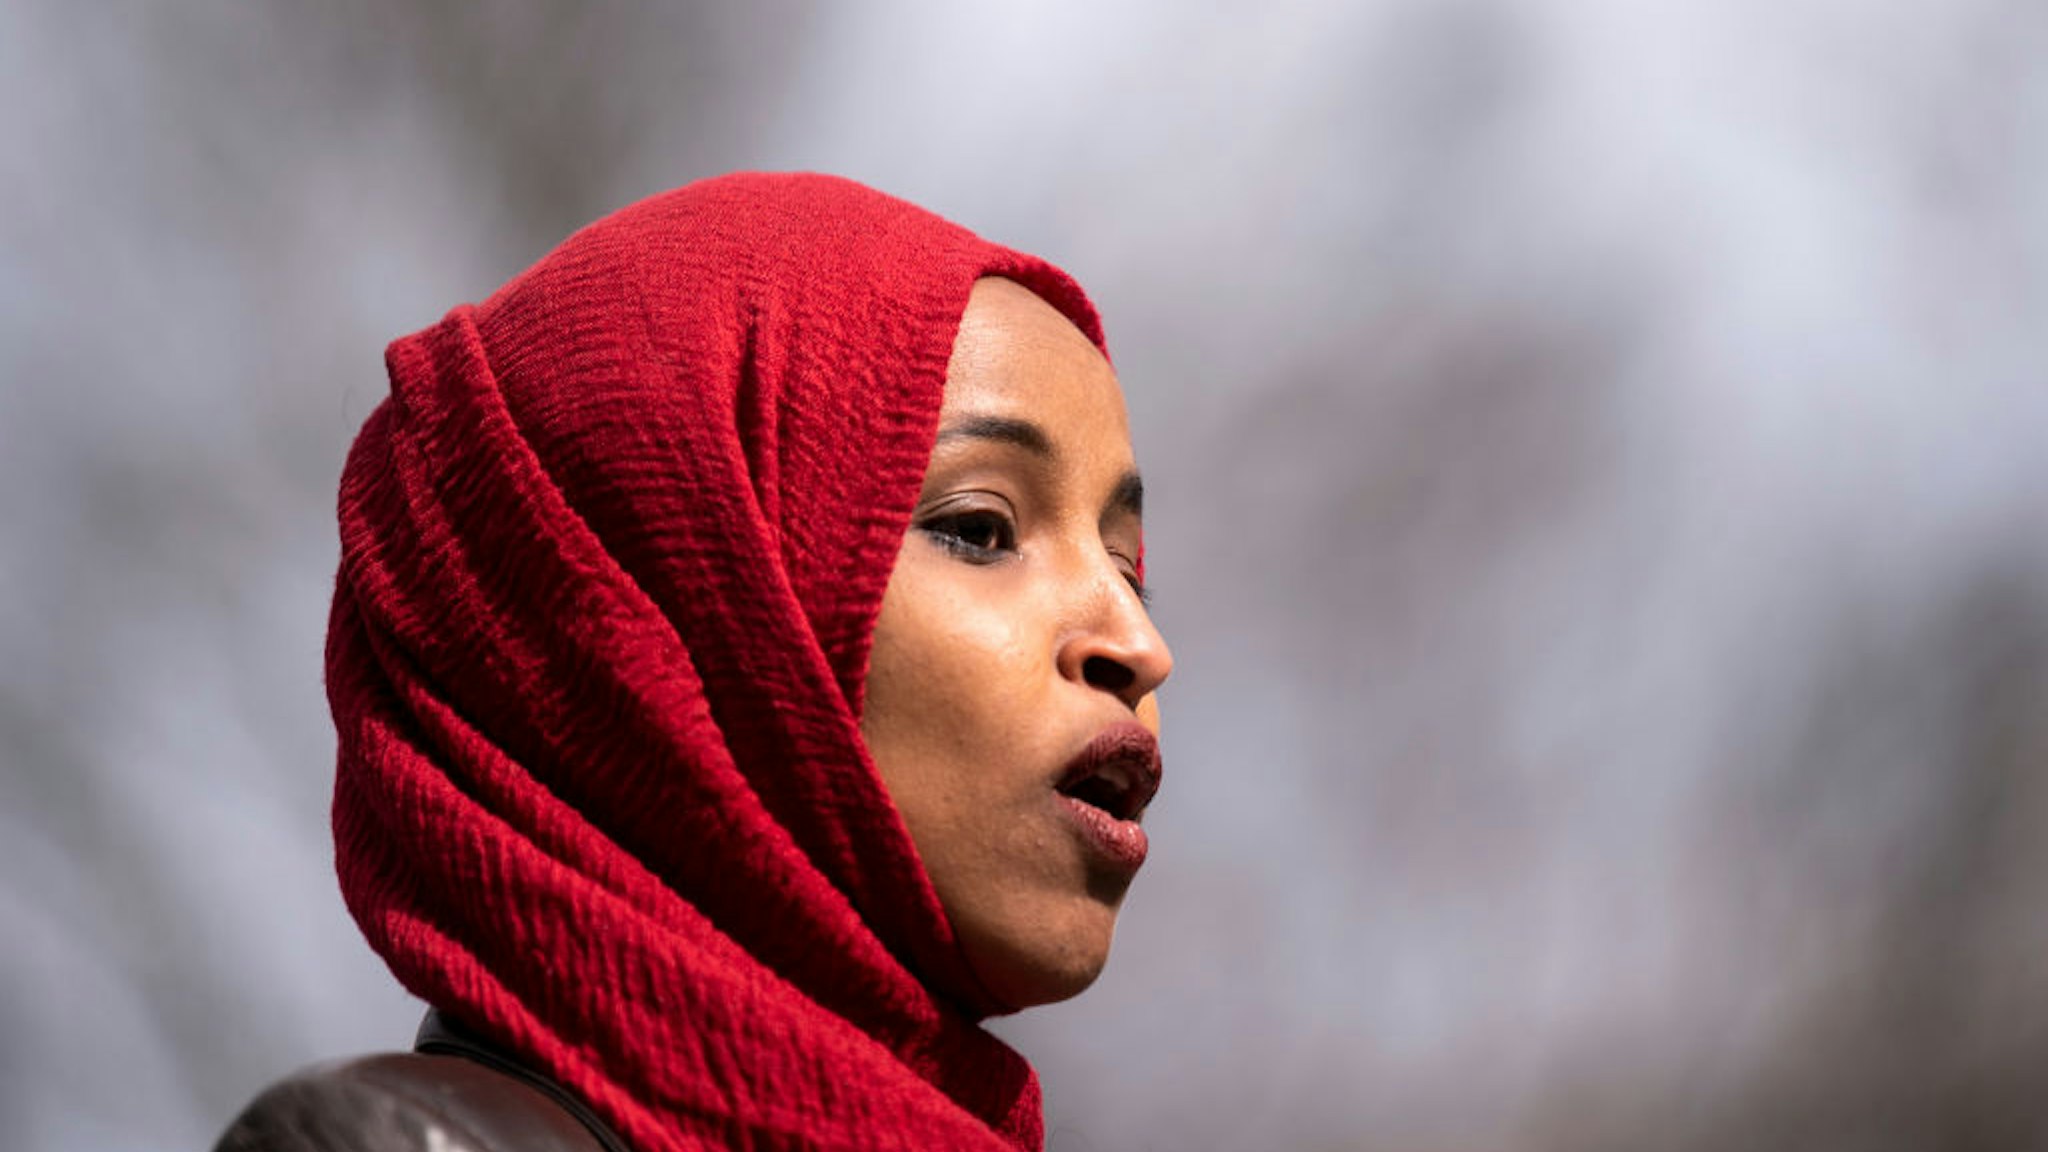 BROOKLYN CENTER, MN - APRIL 20: Rep. Ilhan Omar (D-MN) speaks during a press conference at a memorial for Daunte Wright on April 20, 2021 in Brooklyn Center, Minnesota. Twenty-year-old Daunte Wright was shot and killed during a traffic stop on April 11, 2021 by Brooklyn Center police officer Kim Potter, who has since resigned and been charged with second-degree manslaughter. (Photo by Stephen Maturen/Getty Images)